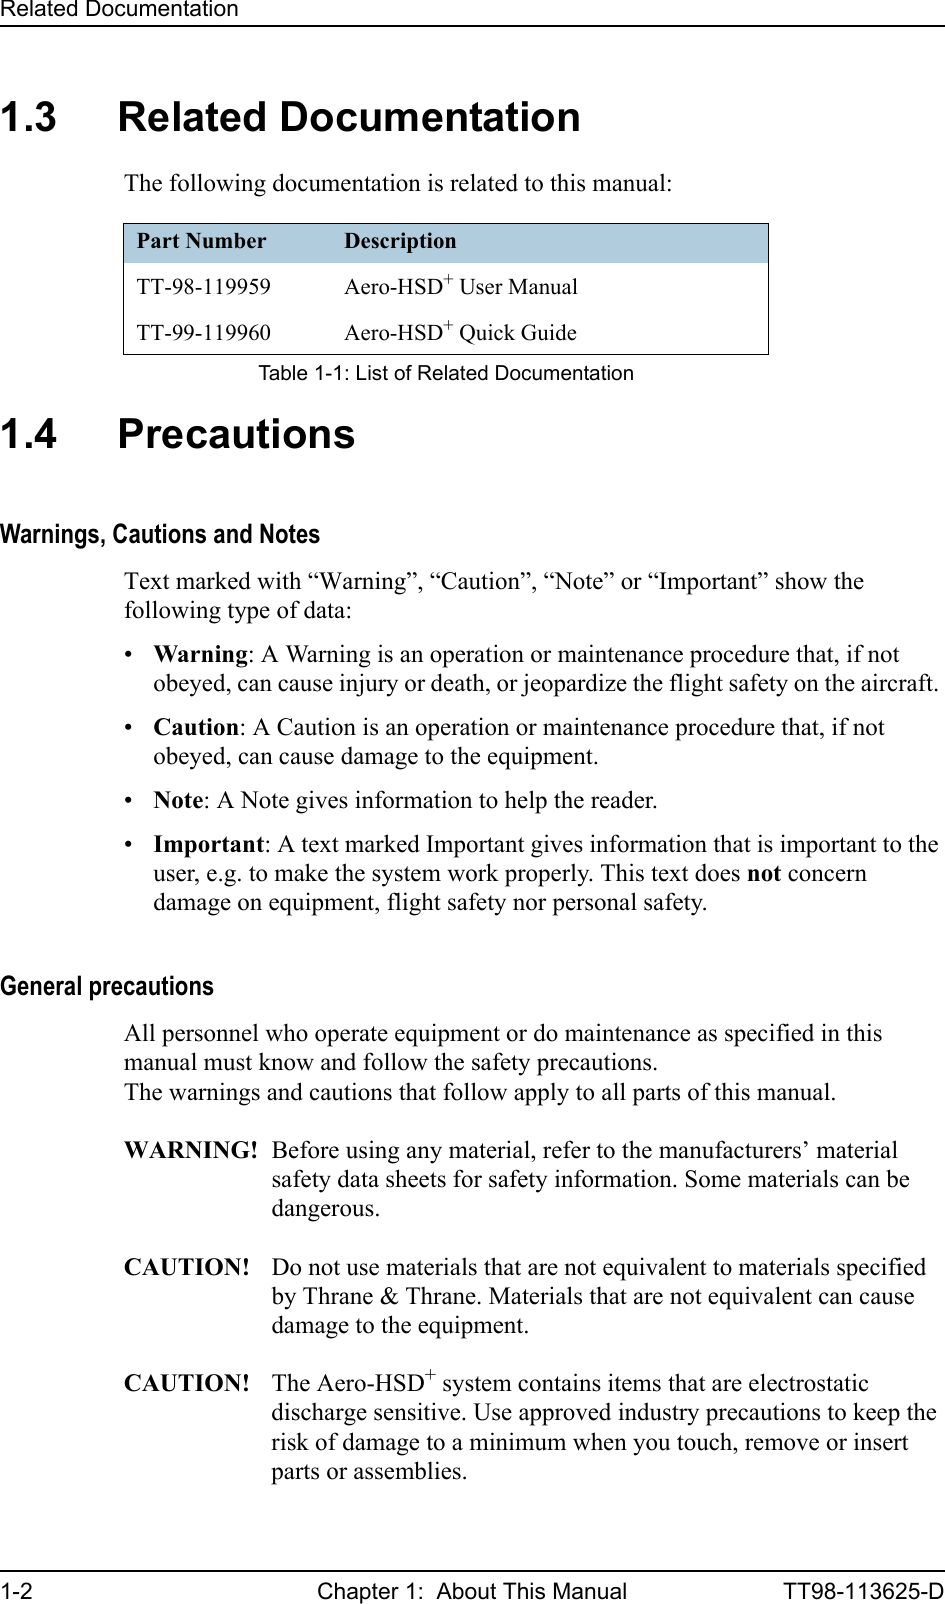 Related Documentation1-2 Chapter 1:  About This Manual TT98-113625-D1.3 Related DocumentationThe following documentation is related to this manual:1.4 PrecautionsWarnings, Cautions and NotesText marked with “Warning”, “Caution”, “Note” or “Important” show the following type of data:•Warning: A Warning is an operation or maintenance procedure that, if not obeyed, can cause injury or death, or jeopardize the flight safety on the aircraft. •Caution: A Caution is an operation or maintenance procedure that, if not obeyed, can cause damage to the equipment.•Note: A Note gives information to help the reader.•Important: A text marked Important gives information that is important to the user, e.g. to make the system work properly. This text does not concern damage on equipment, flight safety nor personal safety.General precautionsAll personnel who operate equipment or do maintenance as specified in this manual must know and follow the safety precautions.The warnings and cautions that follow apply to all parts of this manual.WARNING! Before using any material, refer to the manufacturers’ material safety data sheets for safety information. Some materials can be dangerous.CAUTION! Do not use materials that are not equivalent to materials specified by Thrane &amp; Thrane. Materials that are not equivalent can cause damage to the equipment.CAUTION! The Aero-HSD+ system contains items that are electrostatic discharge sensitive. Use approved industry precautions to keep the risk of damage to a minimum when you touch, remove or insert parts or assemblies. Part Number DescriptionTT-98-119959 Aero-HSD+ User ManualTT-99-119960 Aero-HSD+ Quick GuideTable 1-1: List of Related Documentation